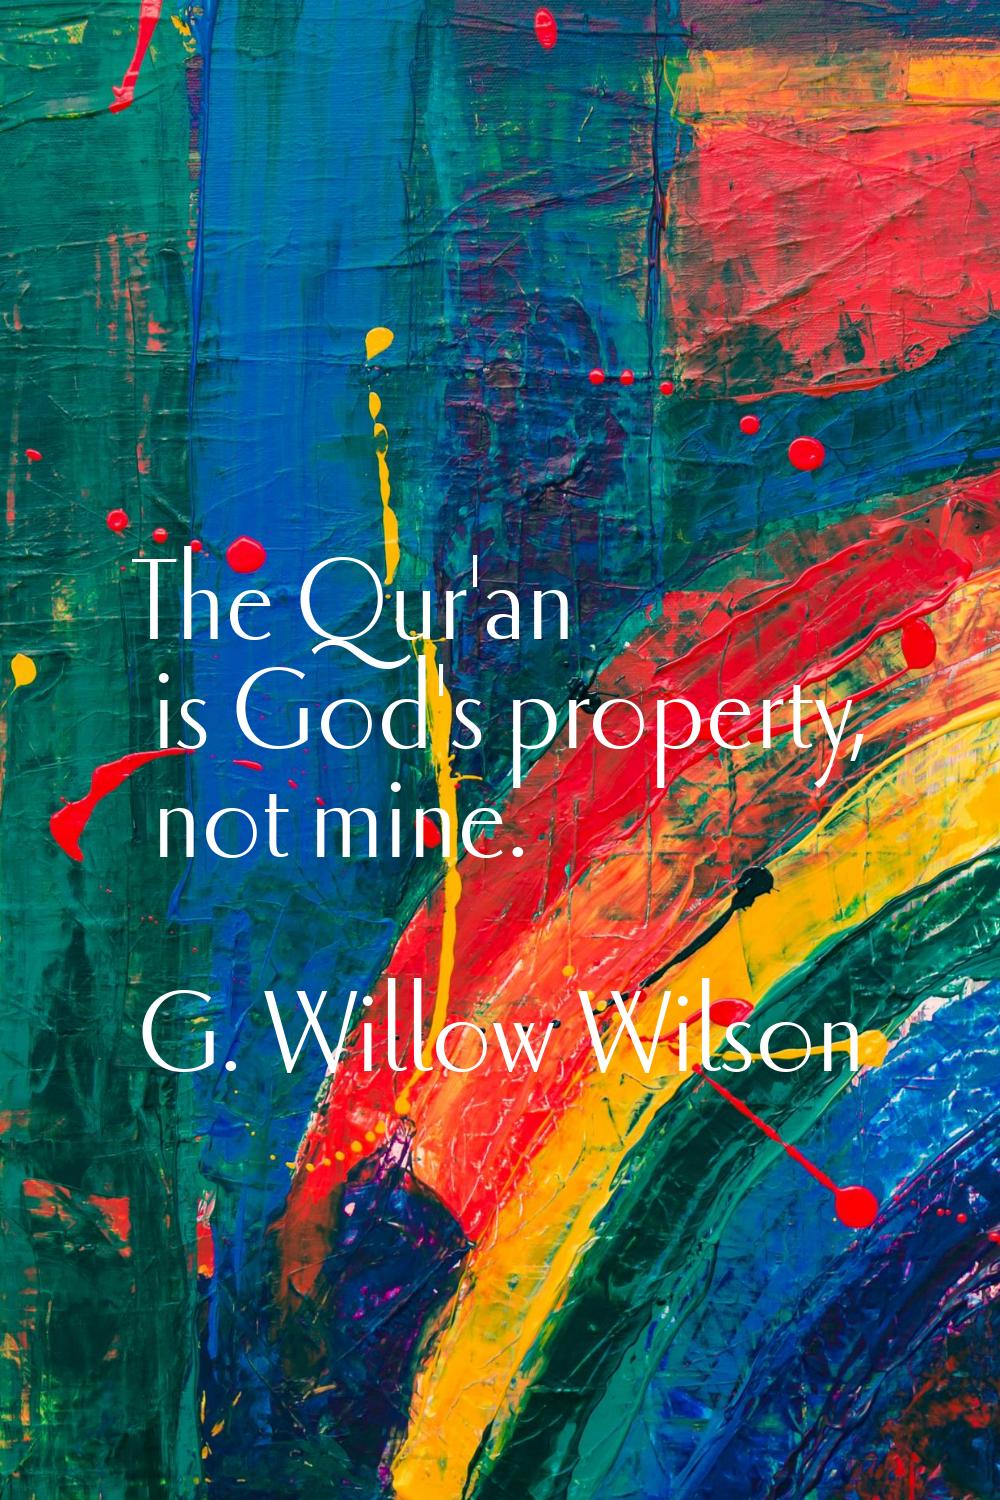 The Qur'an is God's property, not mine.